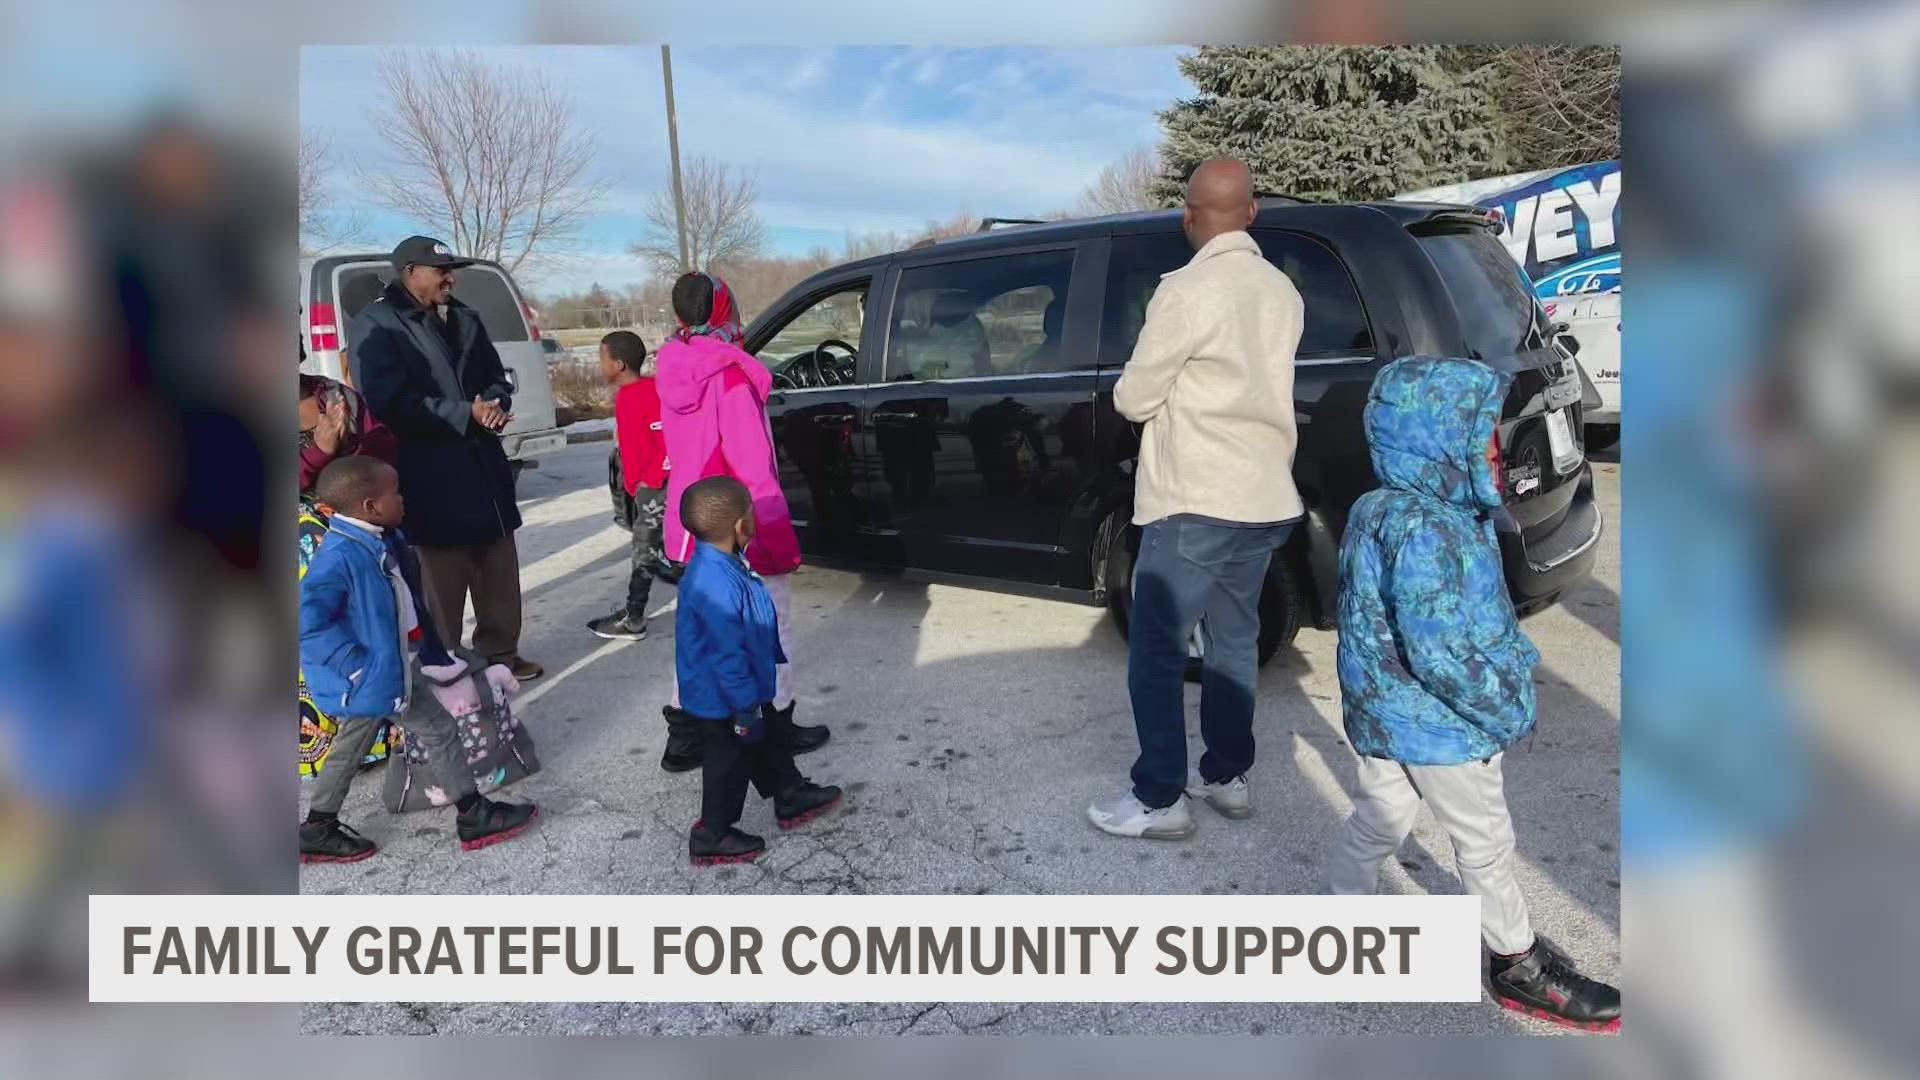 The grandparents for the five kids who lost both parents only four months apart said they are overjoyed with the amount of community support they have been receiving